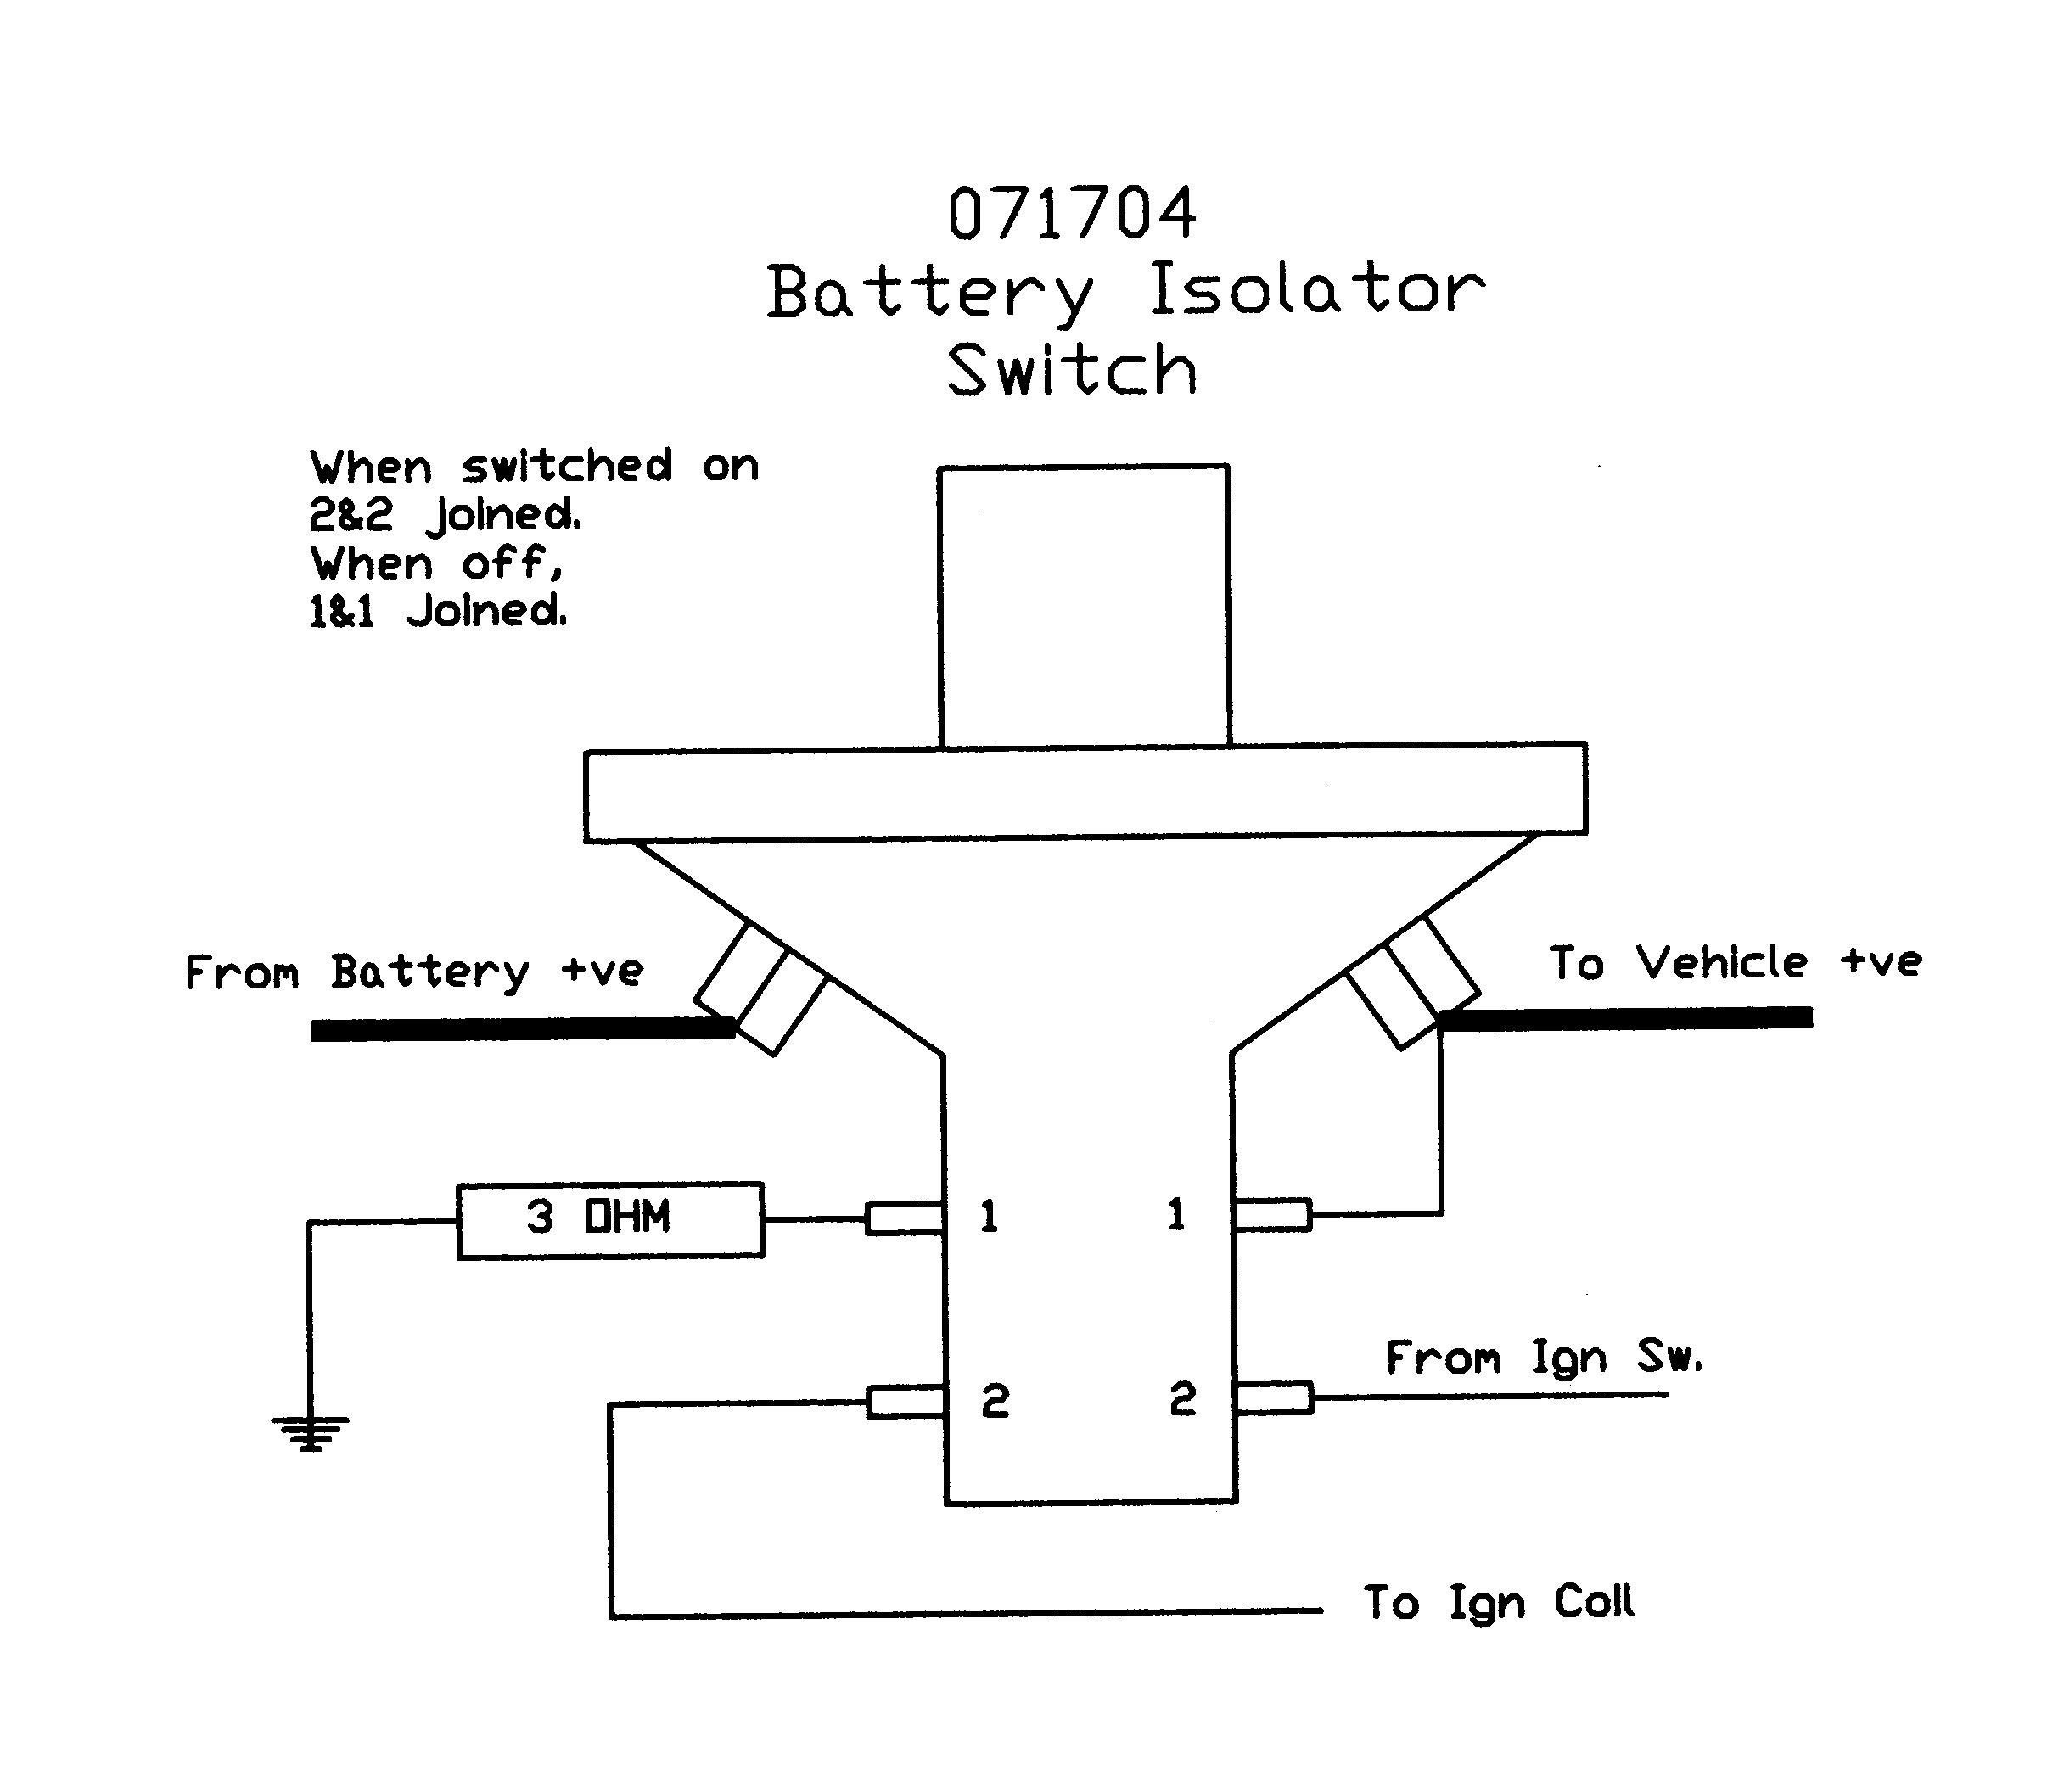 Wiring Diagram For A Guitar Kill Switch Refrence Battery Circuit Diagram Stylish Car Diagram Fabulous Kill Switch